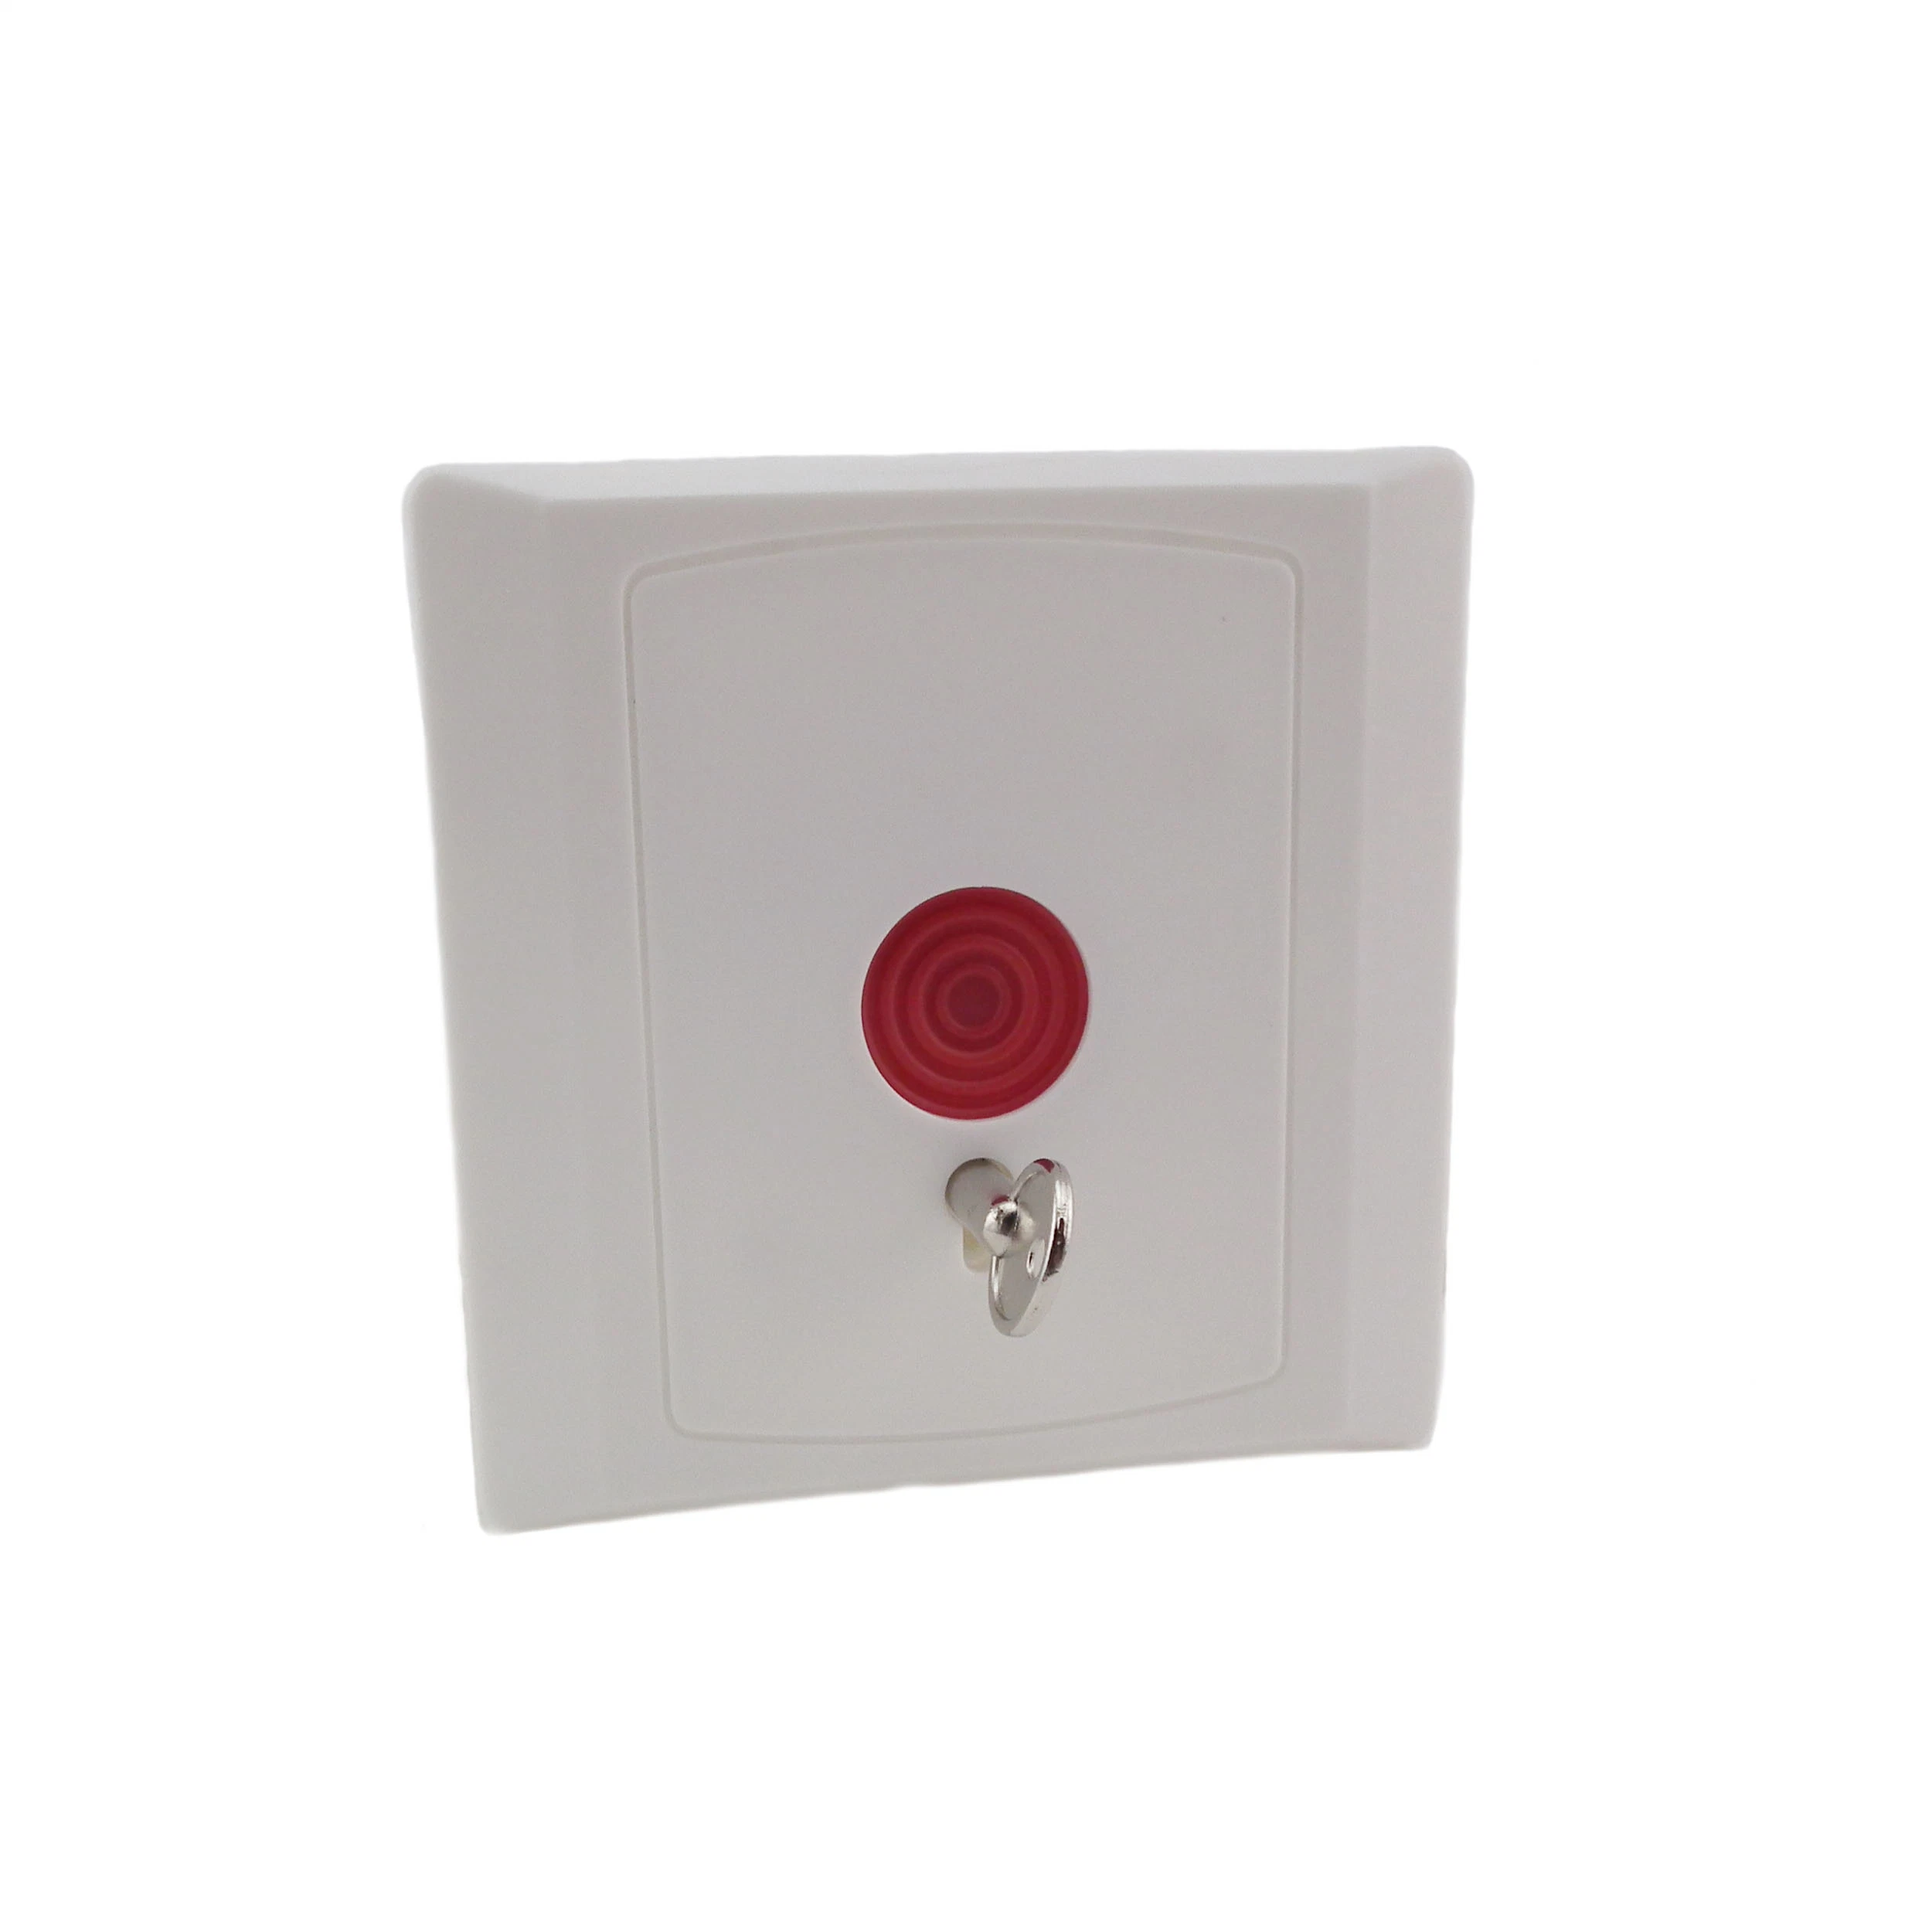 ABS Housing Wired Emergency Button with Key Reset Sos